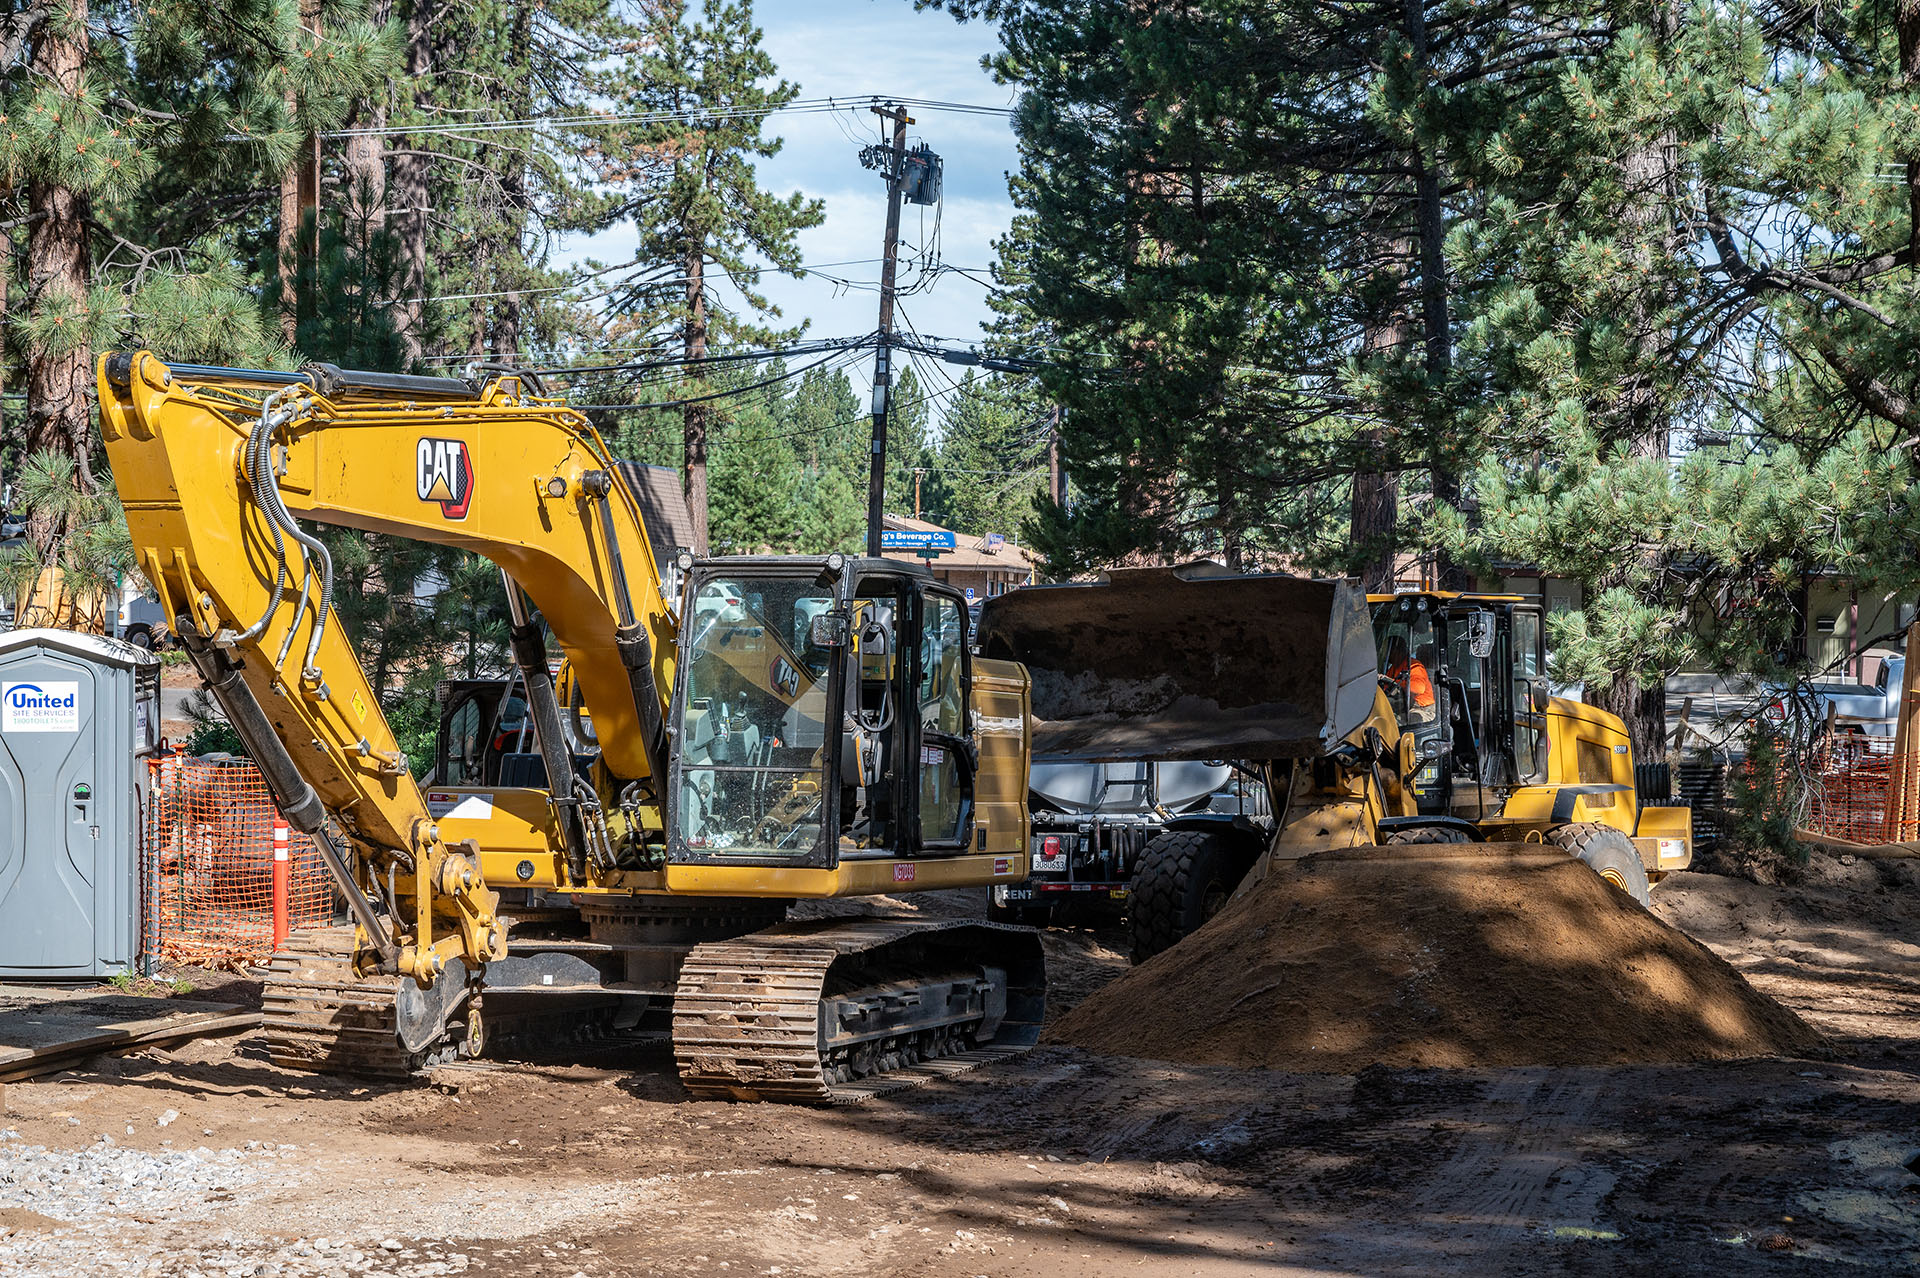 Construction progresses on storm water infrastructure on Conservancy land in South Lake Tahoe.